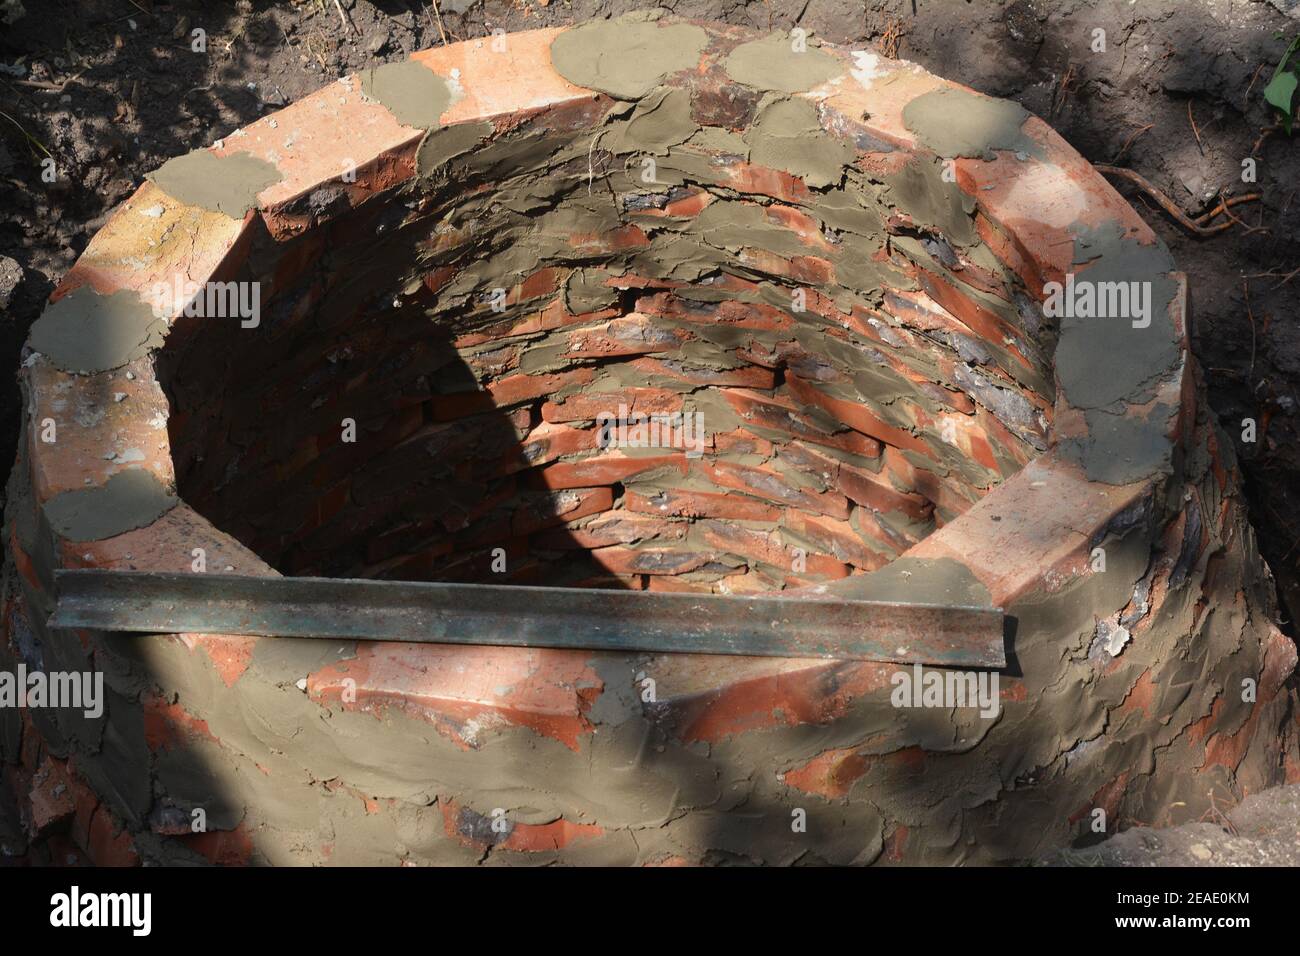 Building a round septic tank, sewer, sewage, cesspool or soak pit for domestic wastewater from red bricks for a private home. Stock Photo